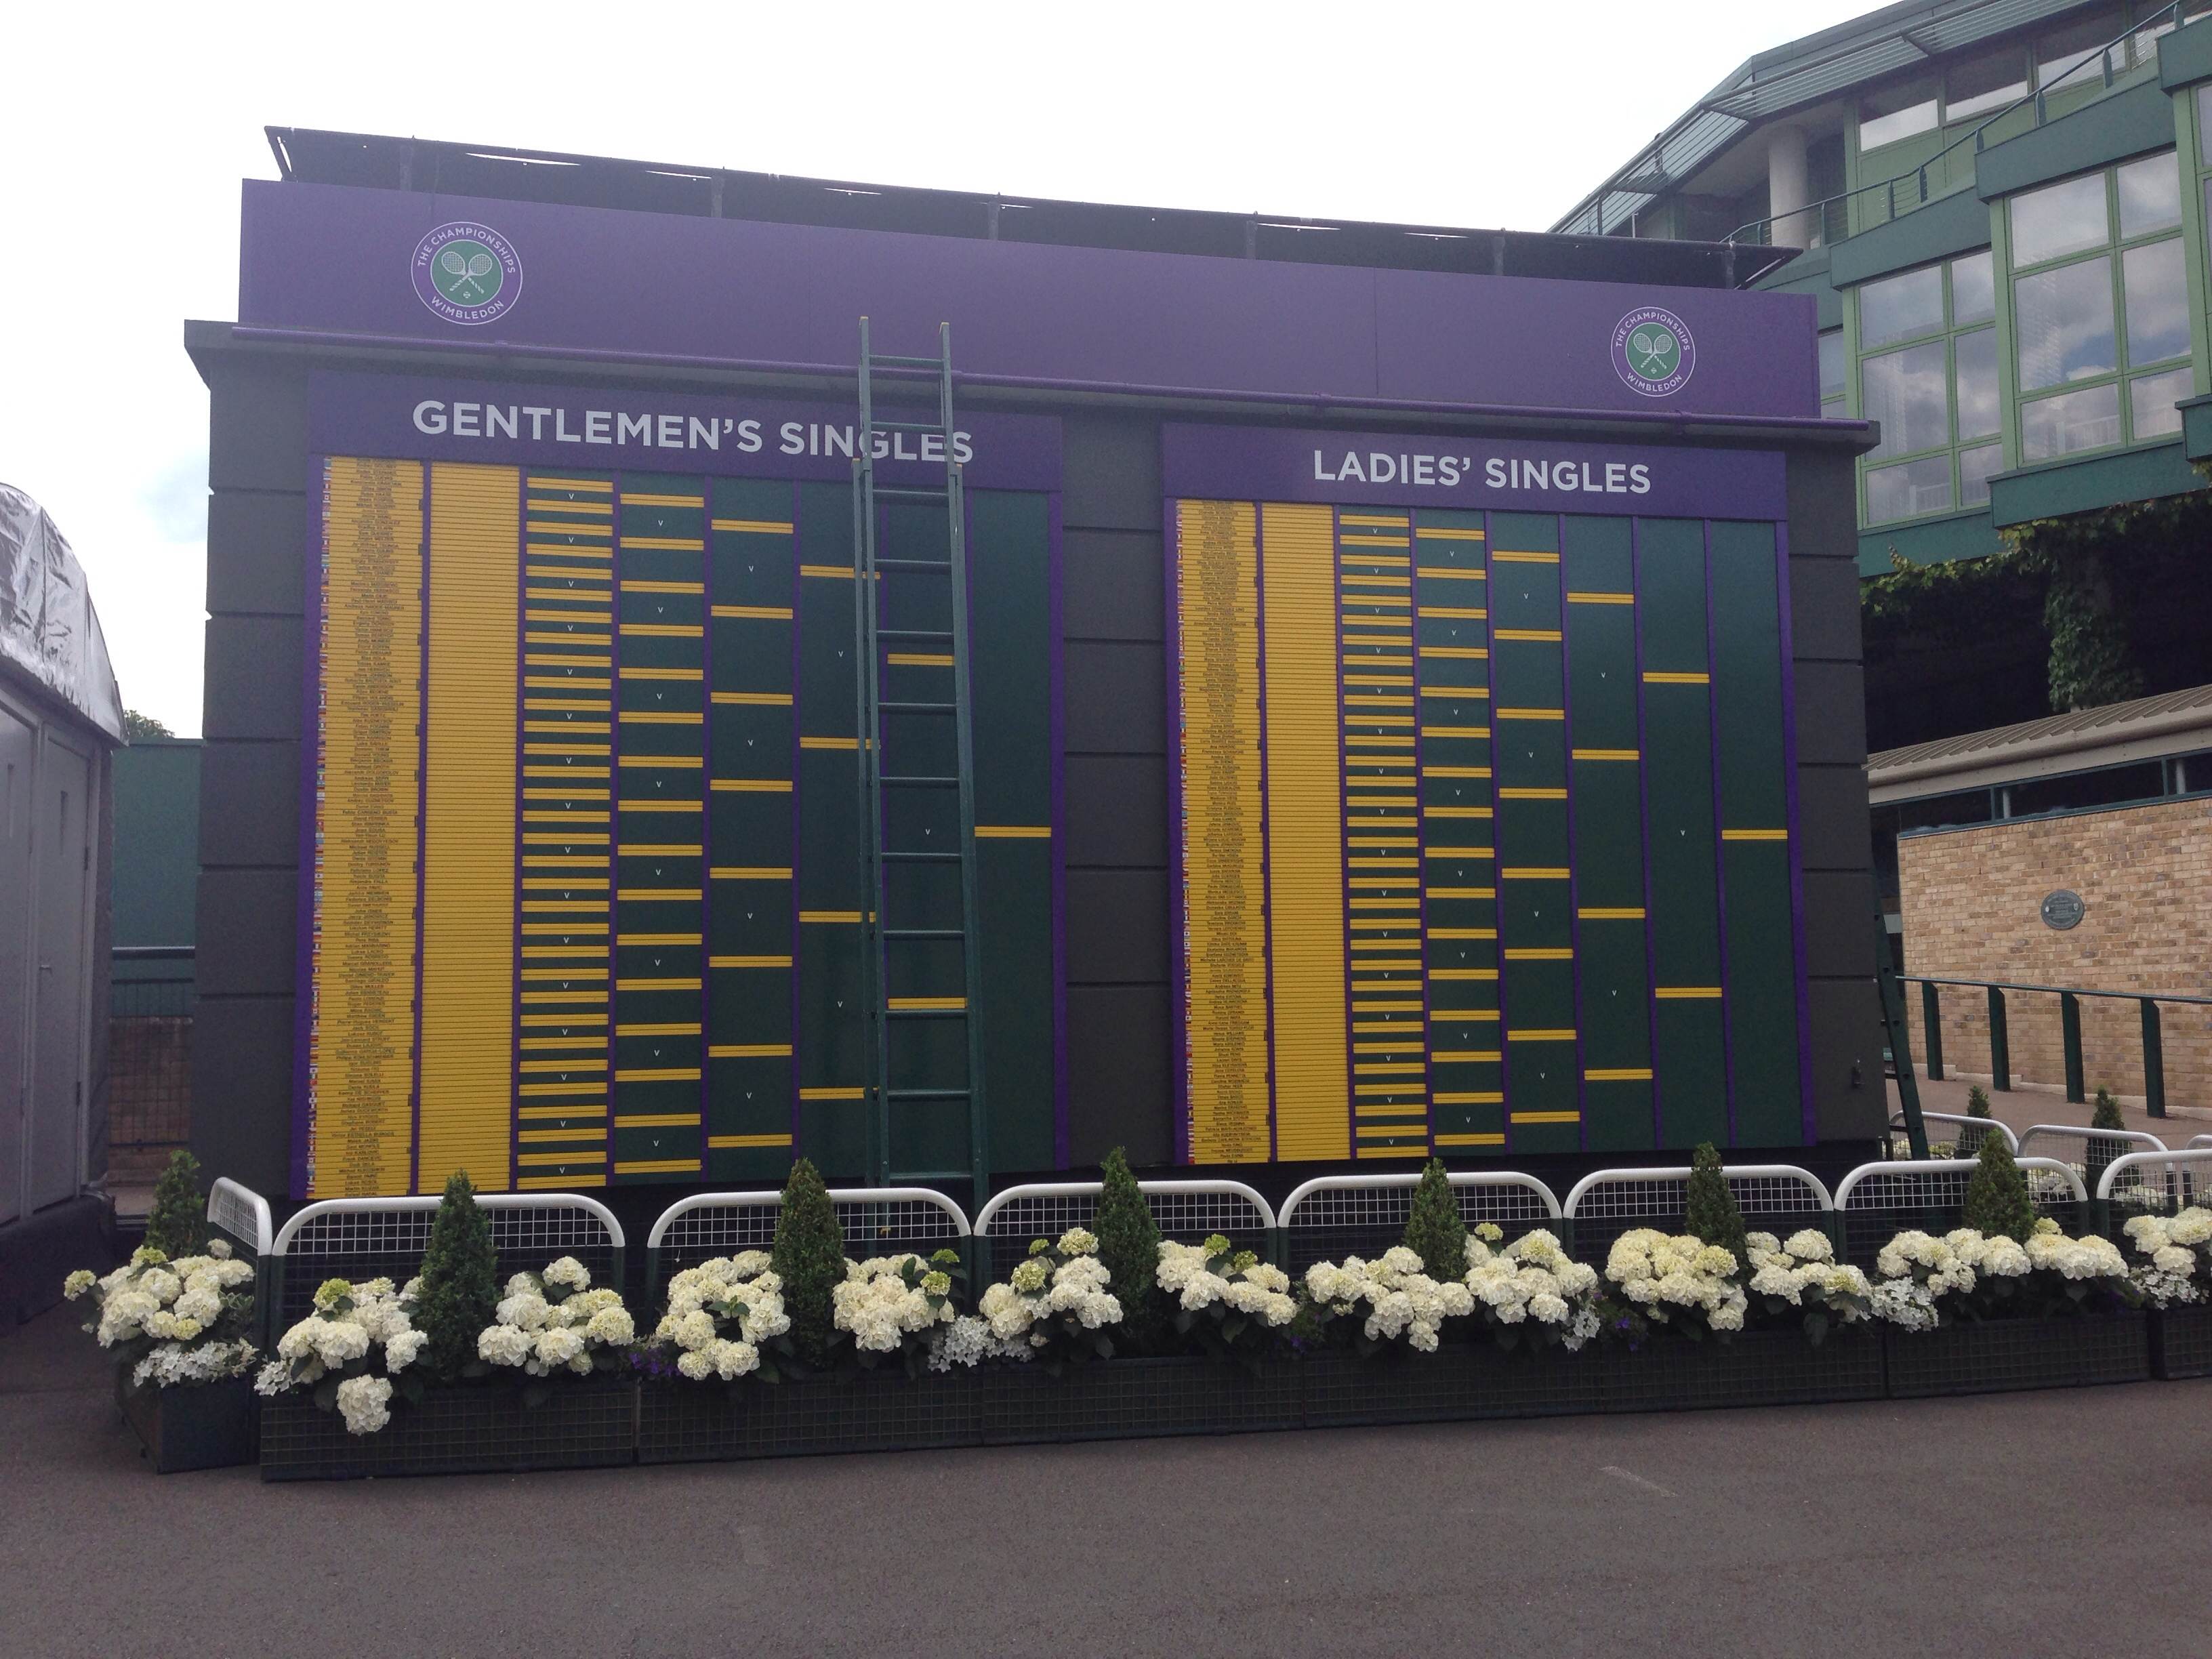 It's Time for Wimbledon: PHOTOS from Centre Court